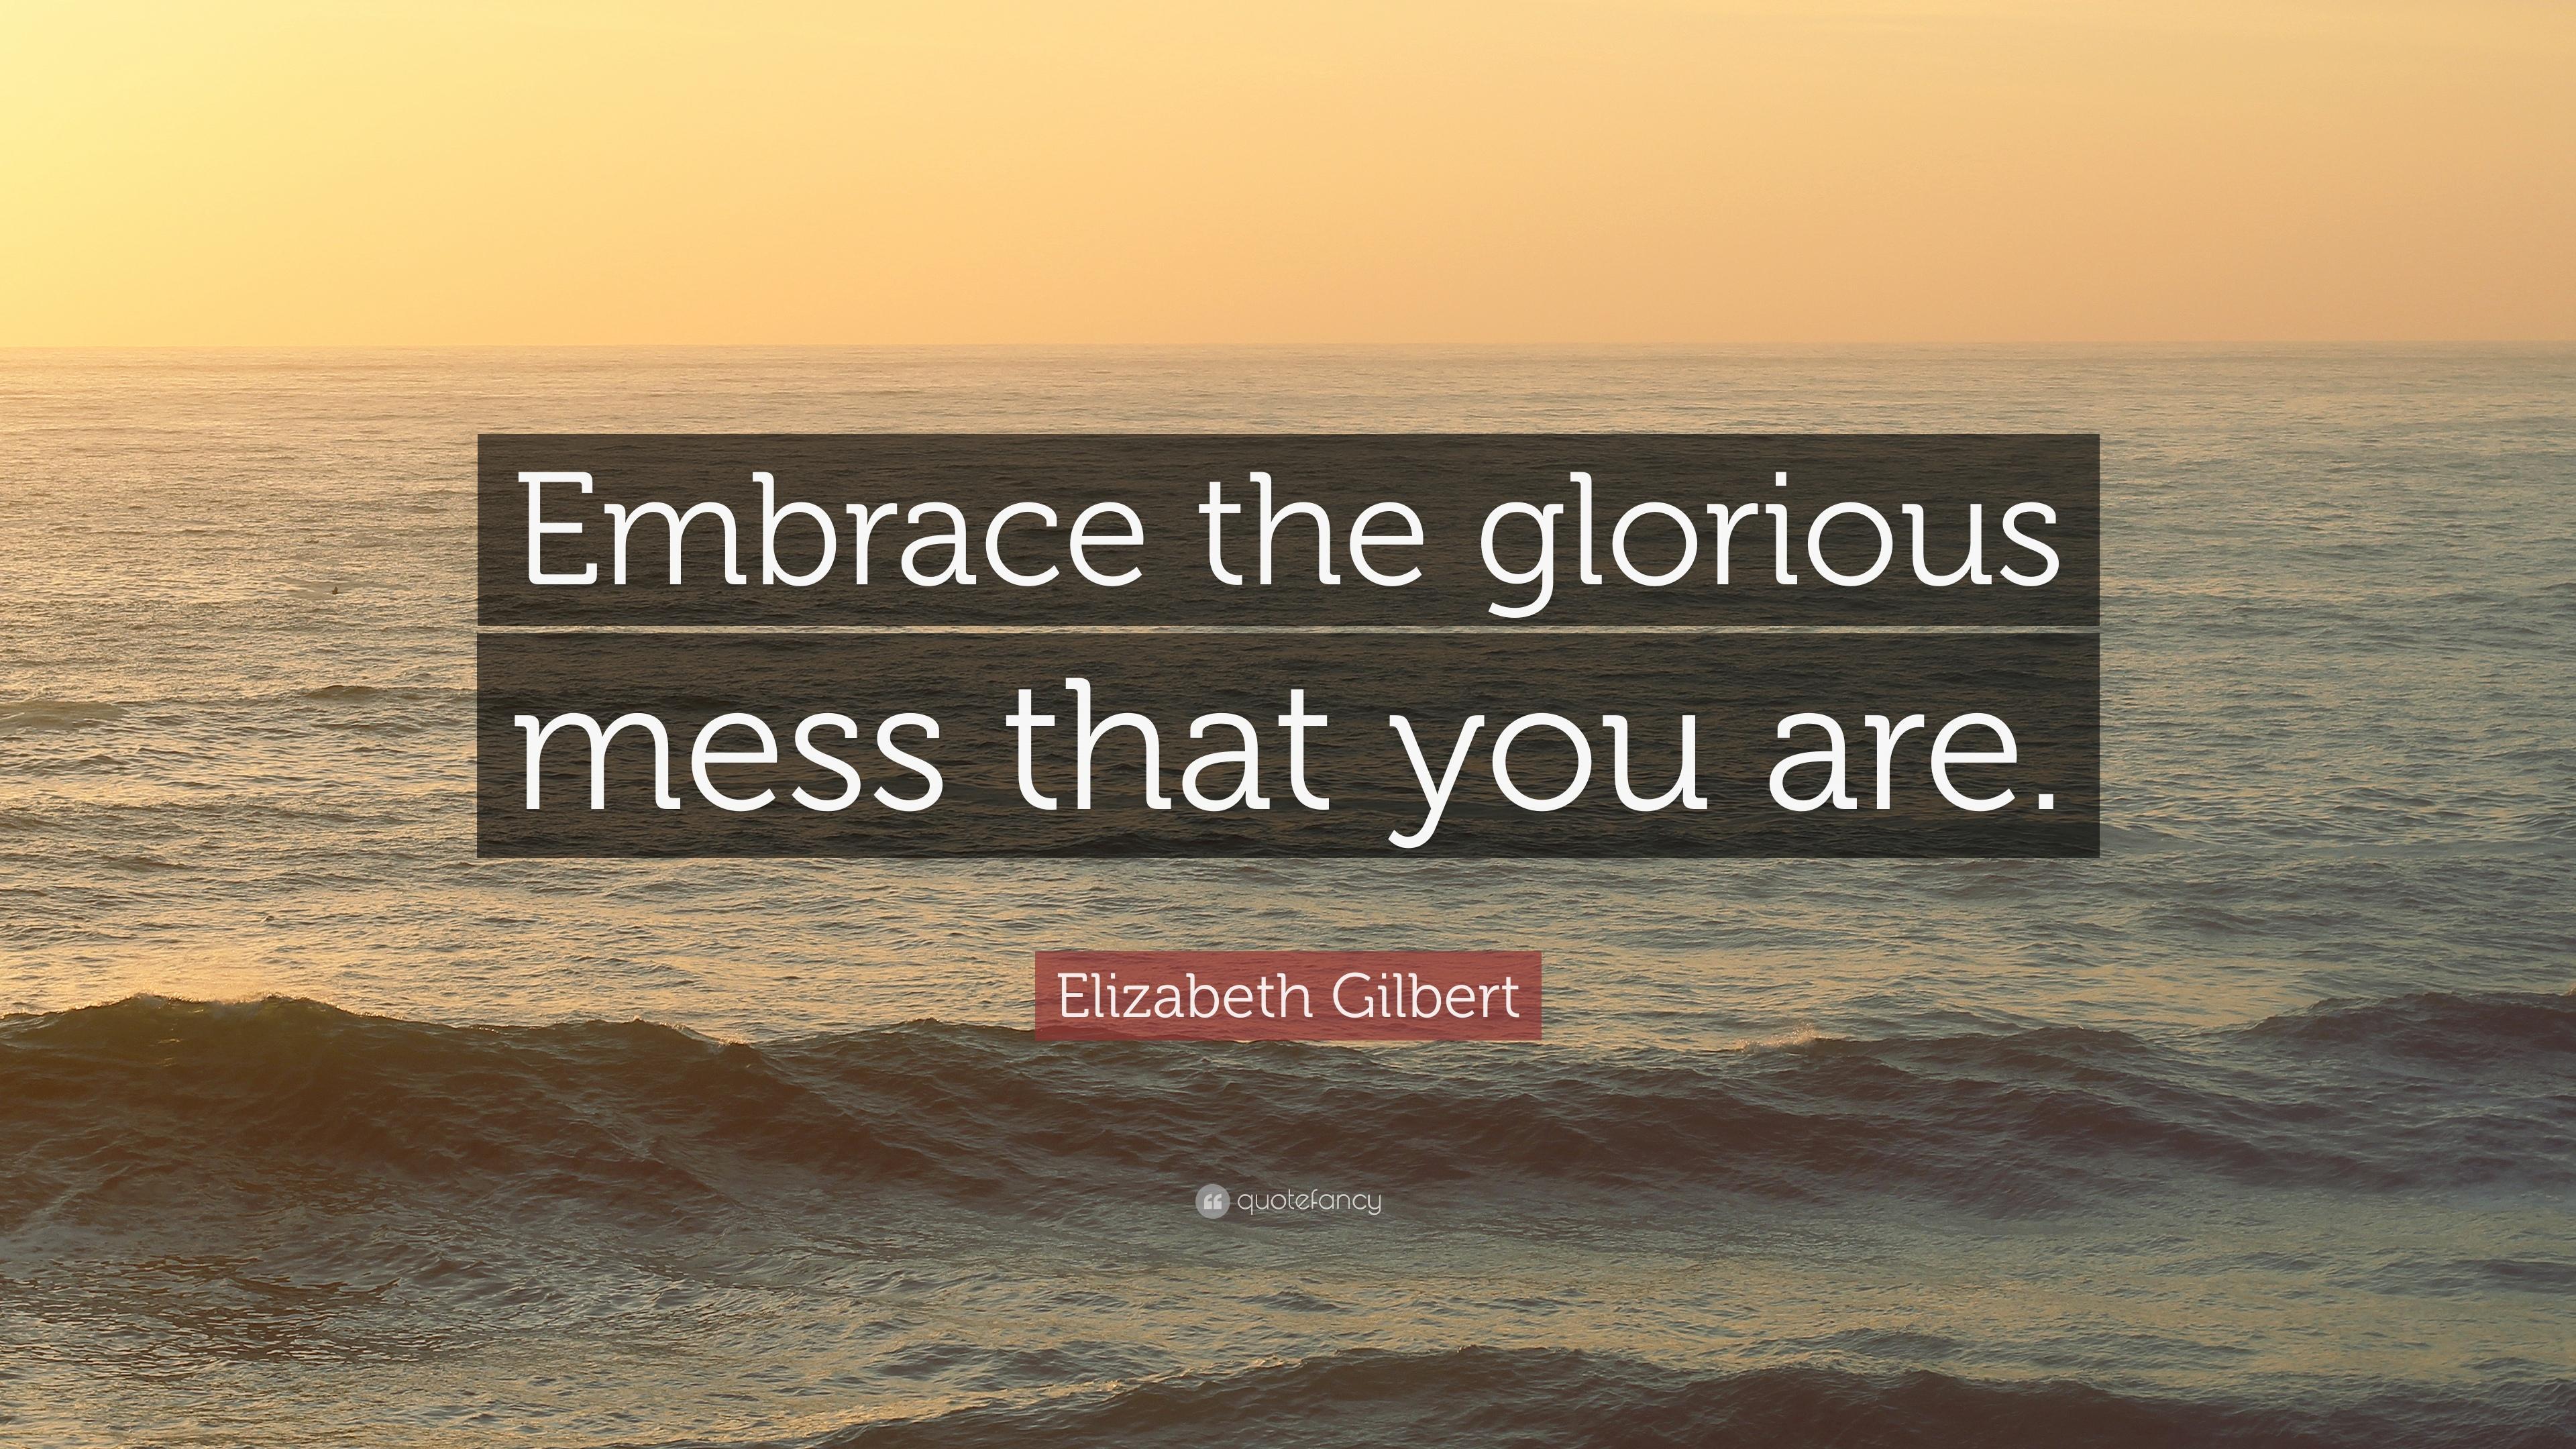 Elizabeth Gilbert Quote: “Embrace the glorious mess that you are